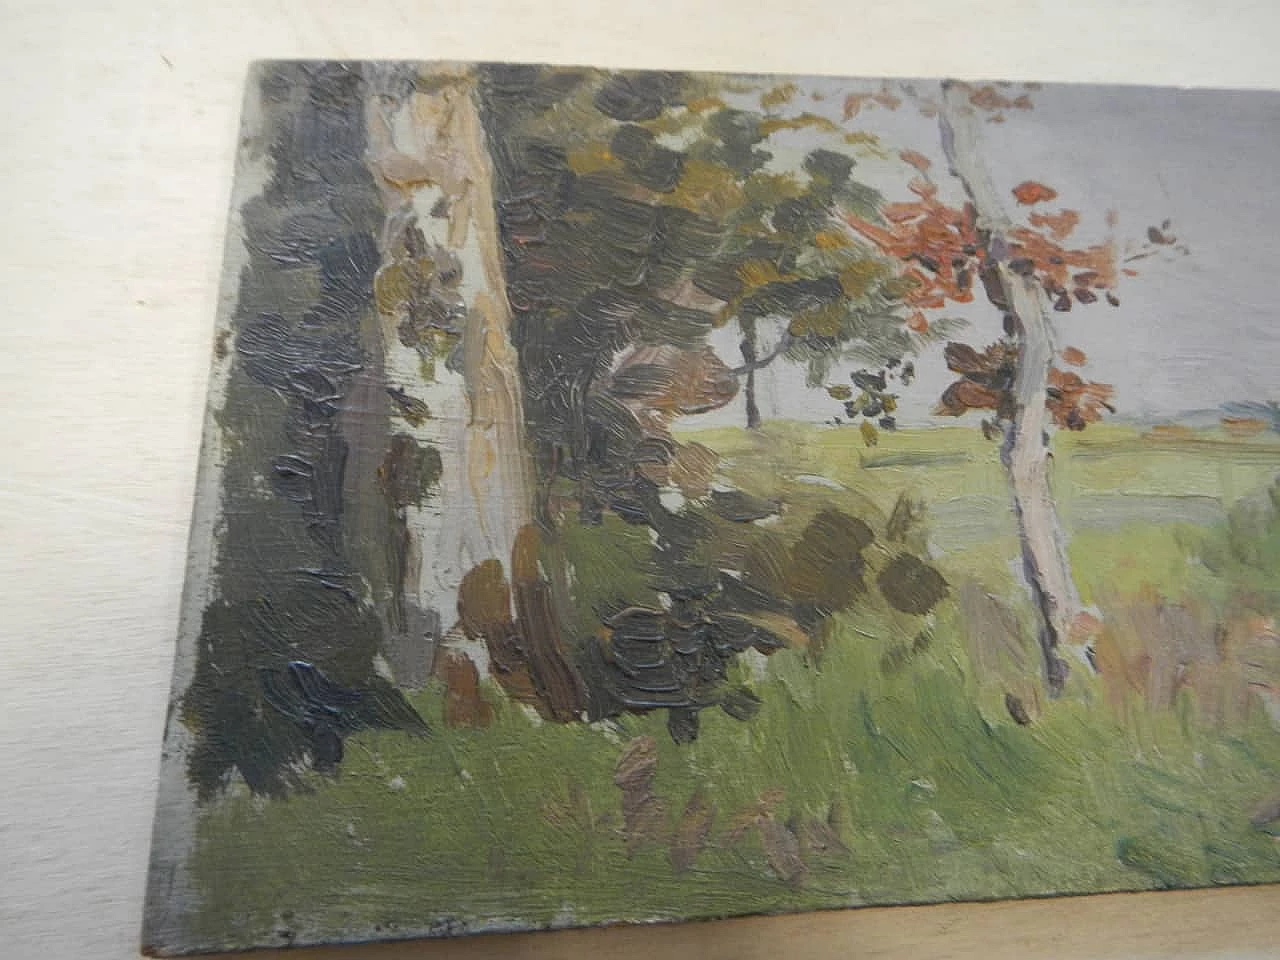 Des Champs, countryside landscape, painting on wood, early 20th century 5